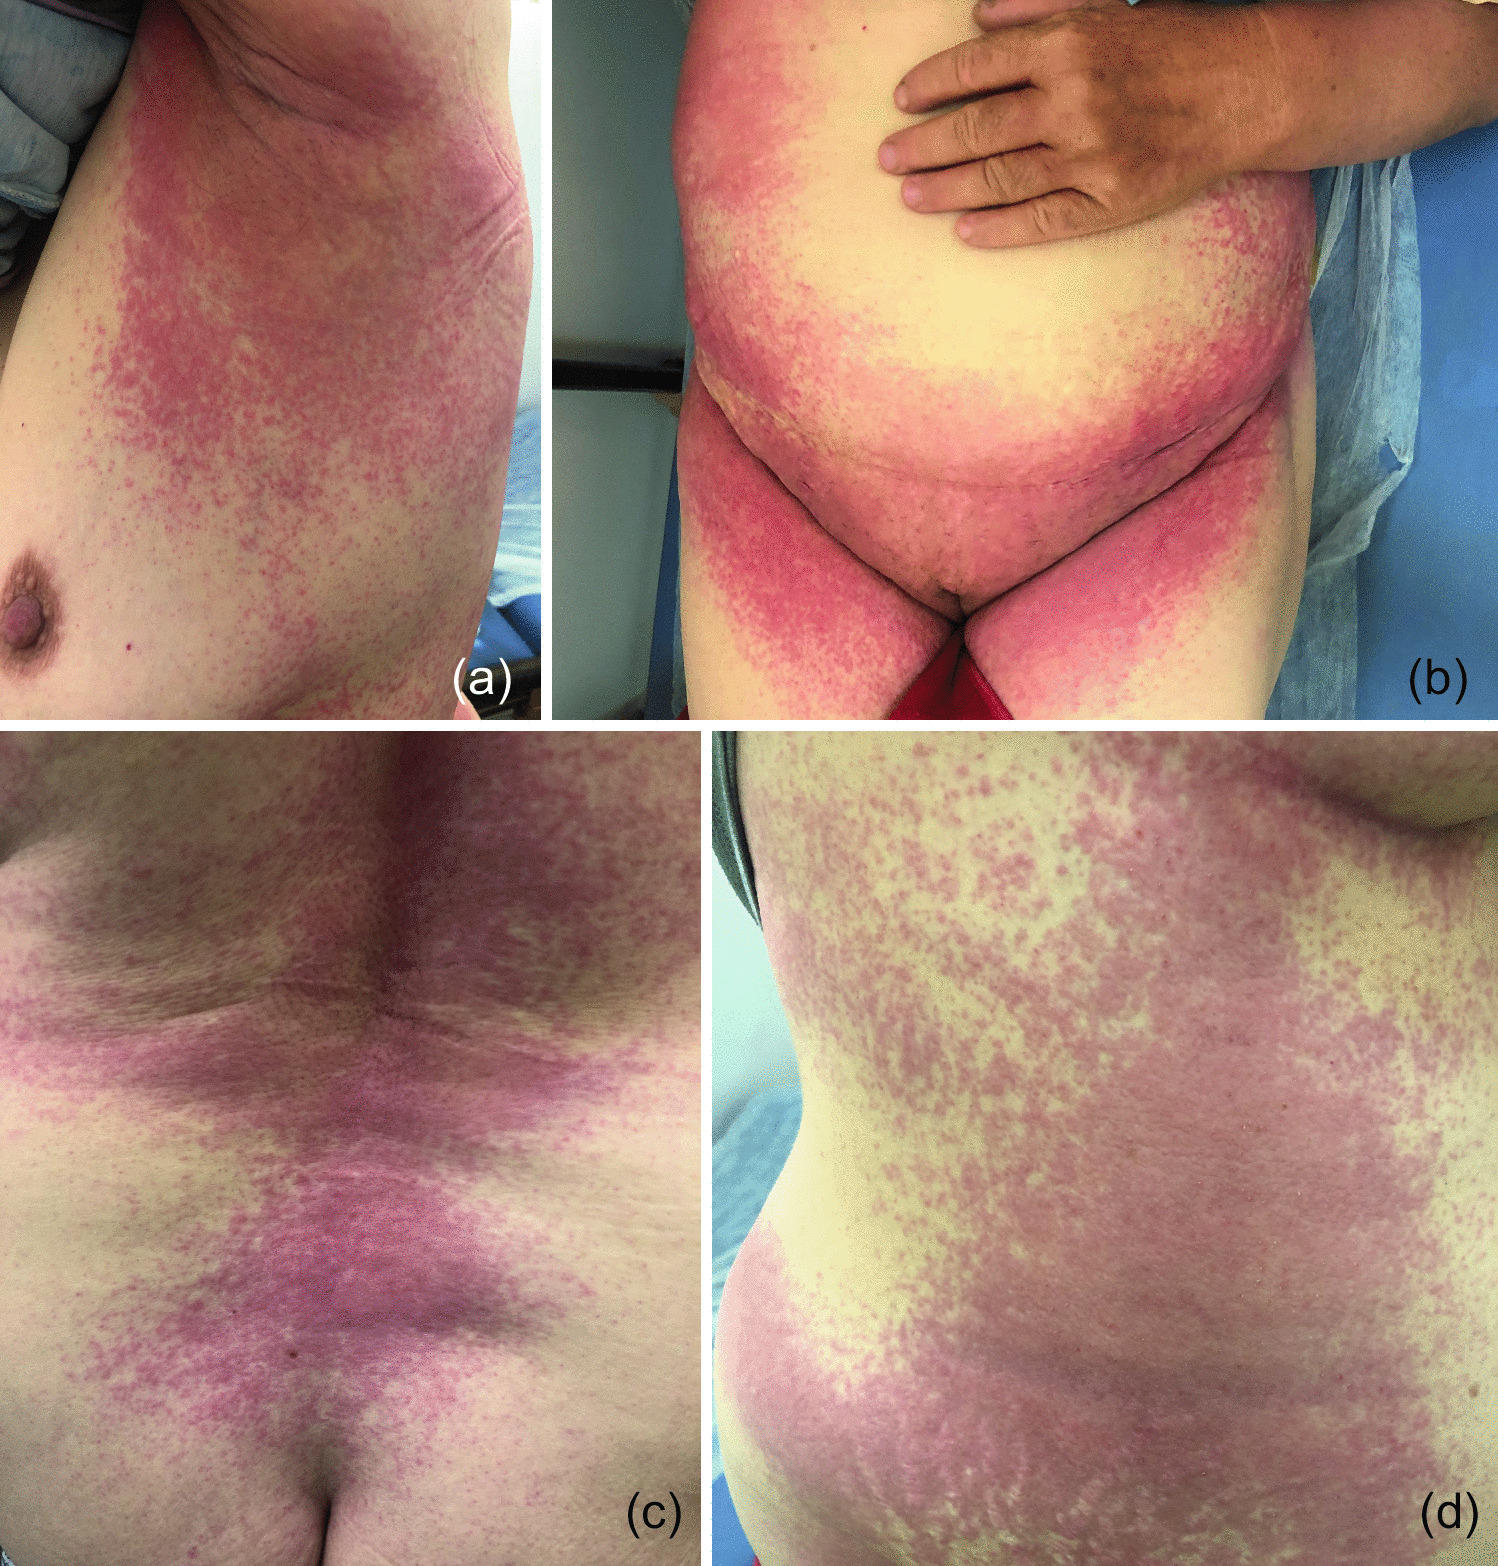 Symmetrical Drug-Related Intertriginous and Flexural Exanthem-Like Eruption Post-COVID-19 Vaccination: A Case Report and Review of the Literature